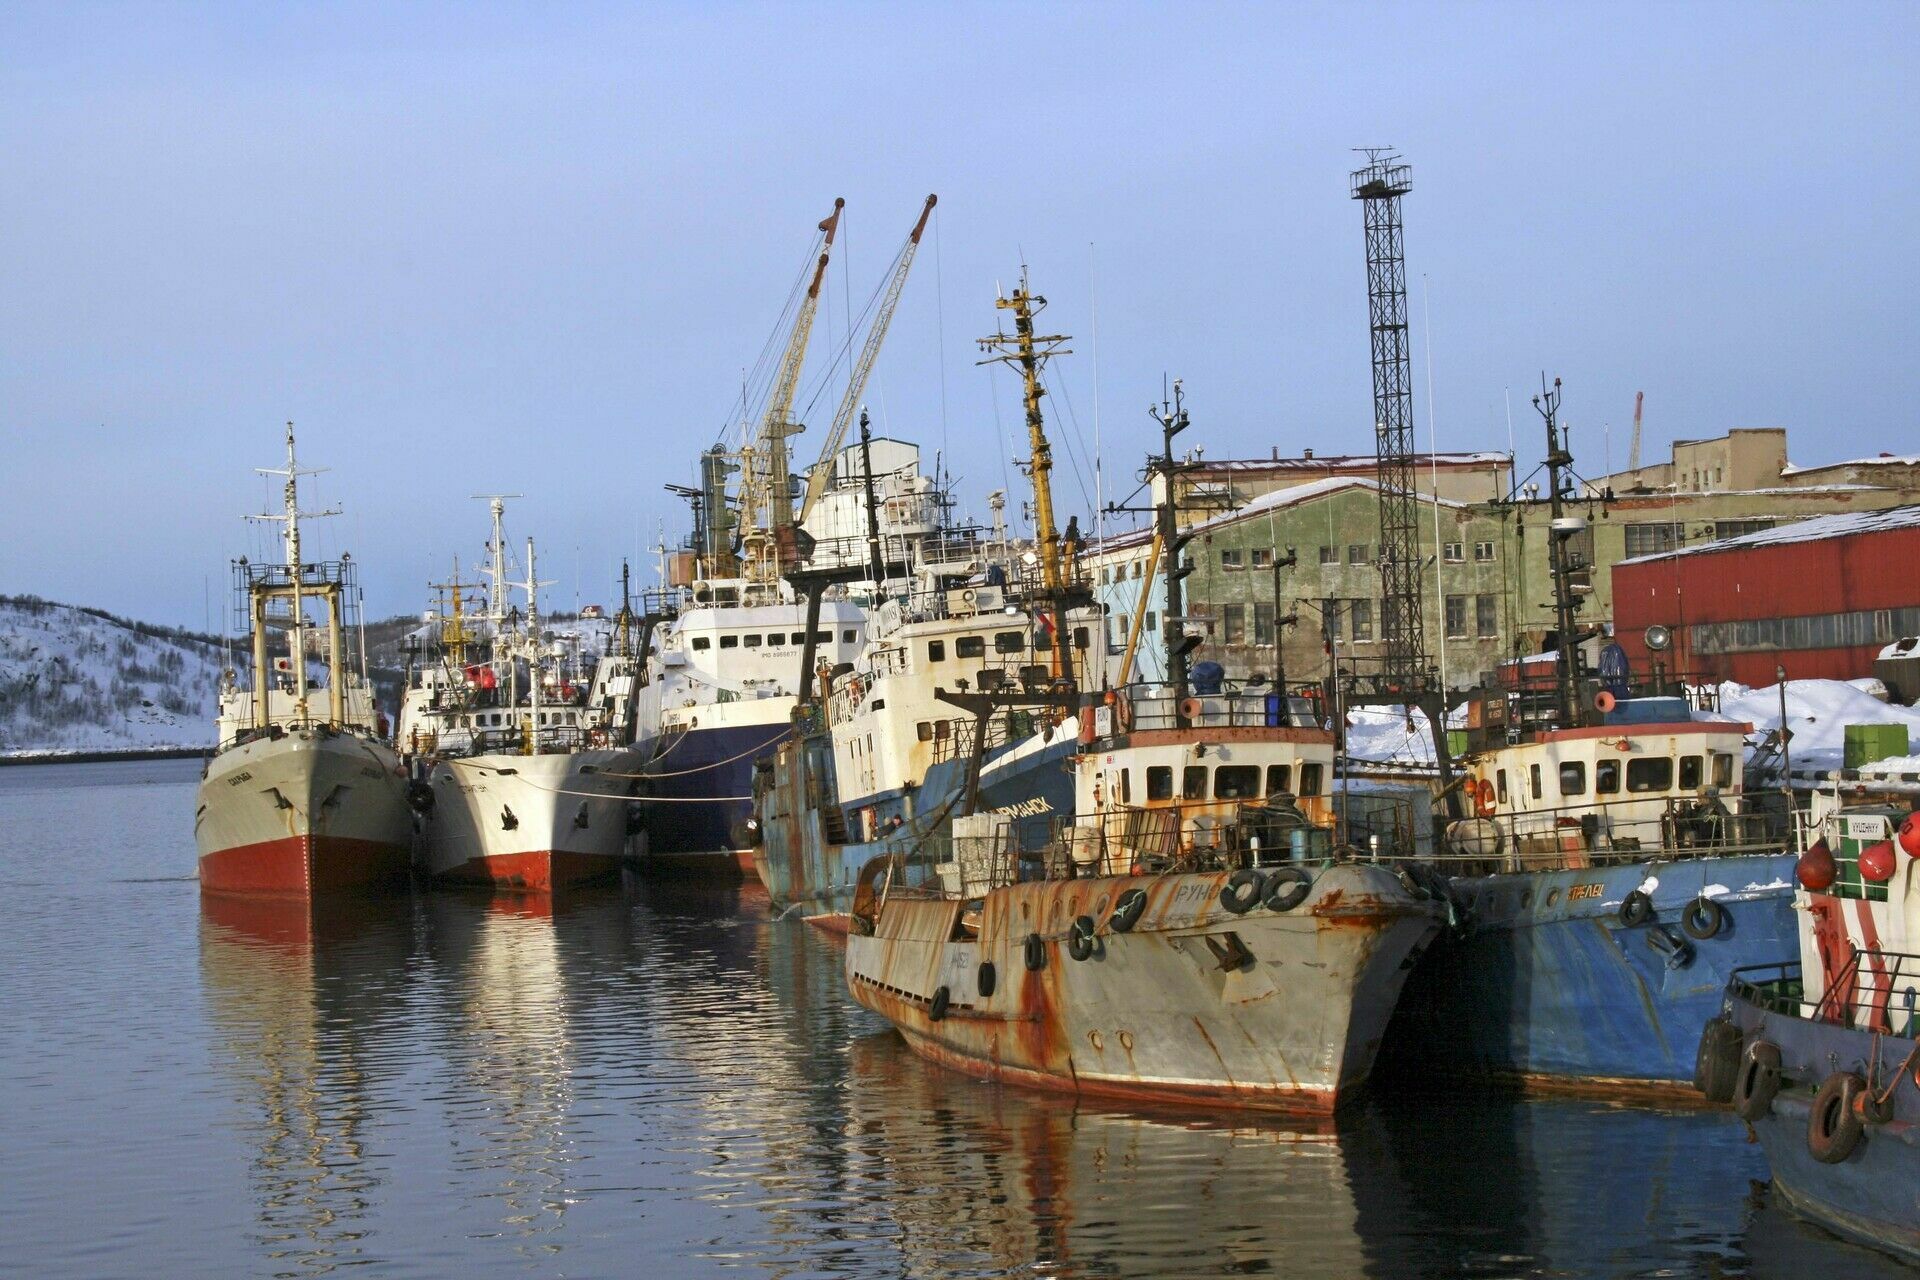 The eternally dead zone: why there is no life in Russian ports